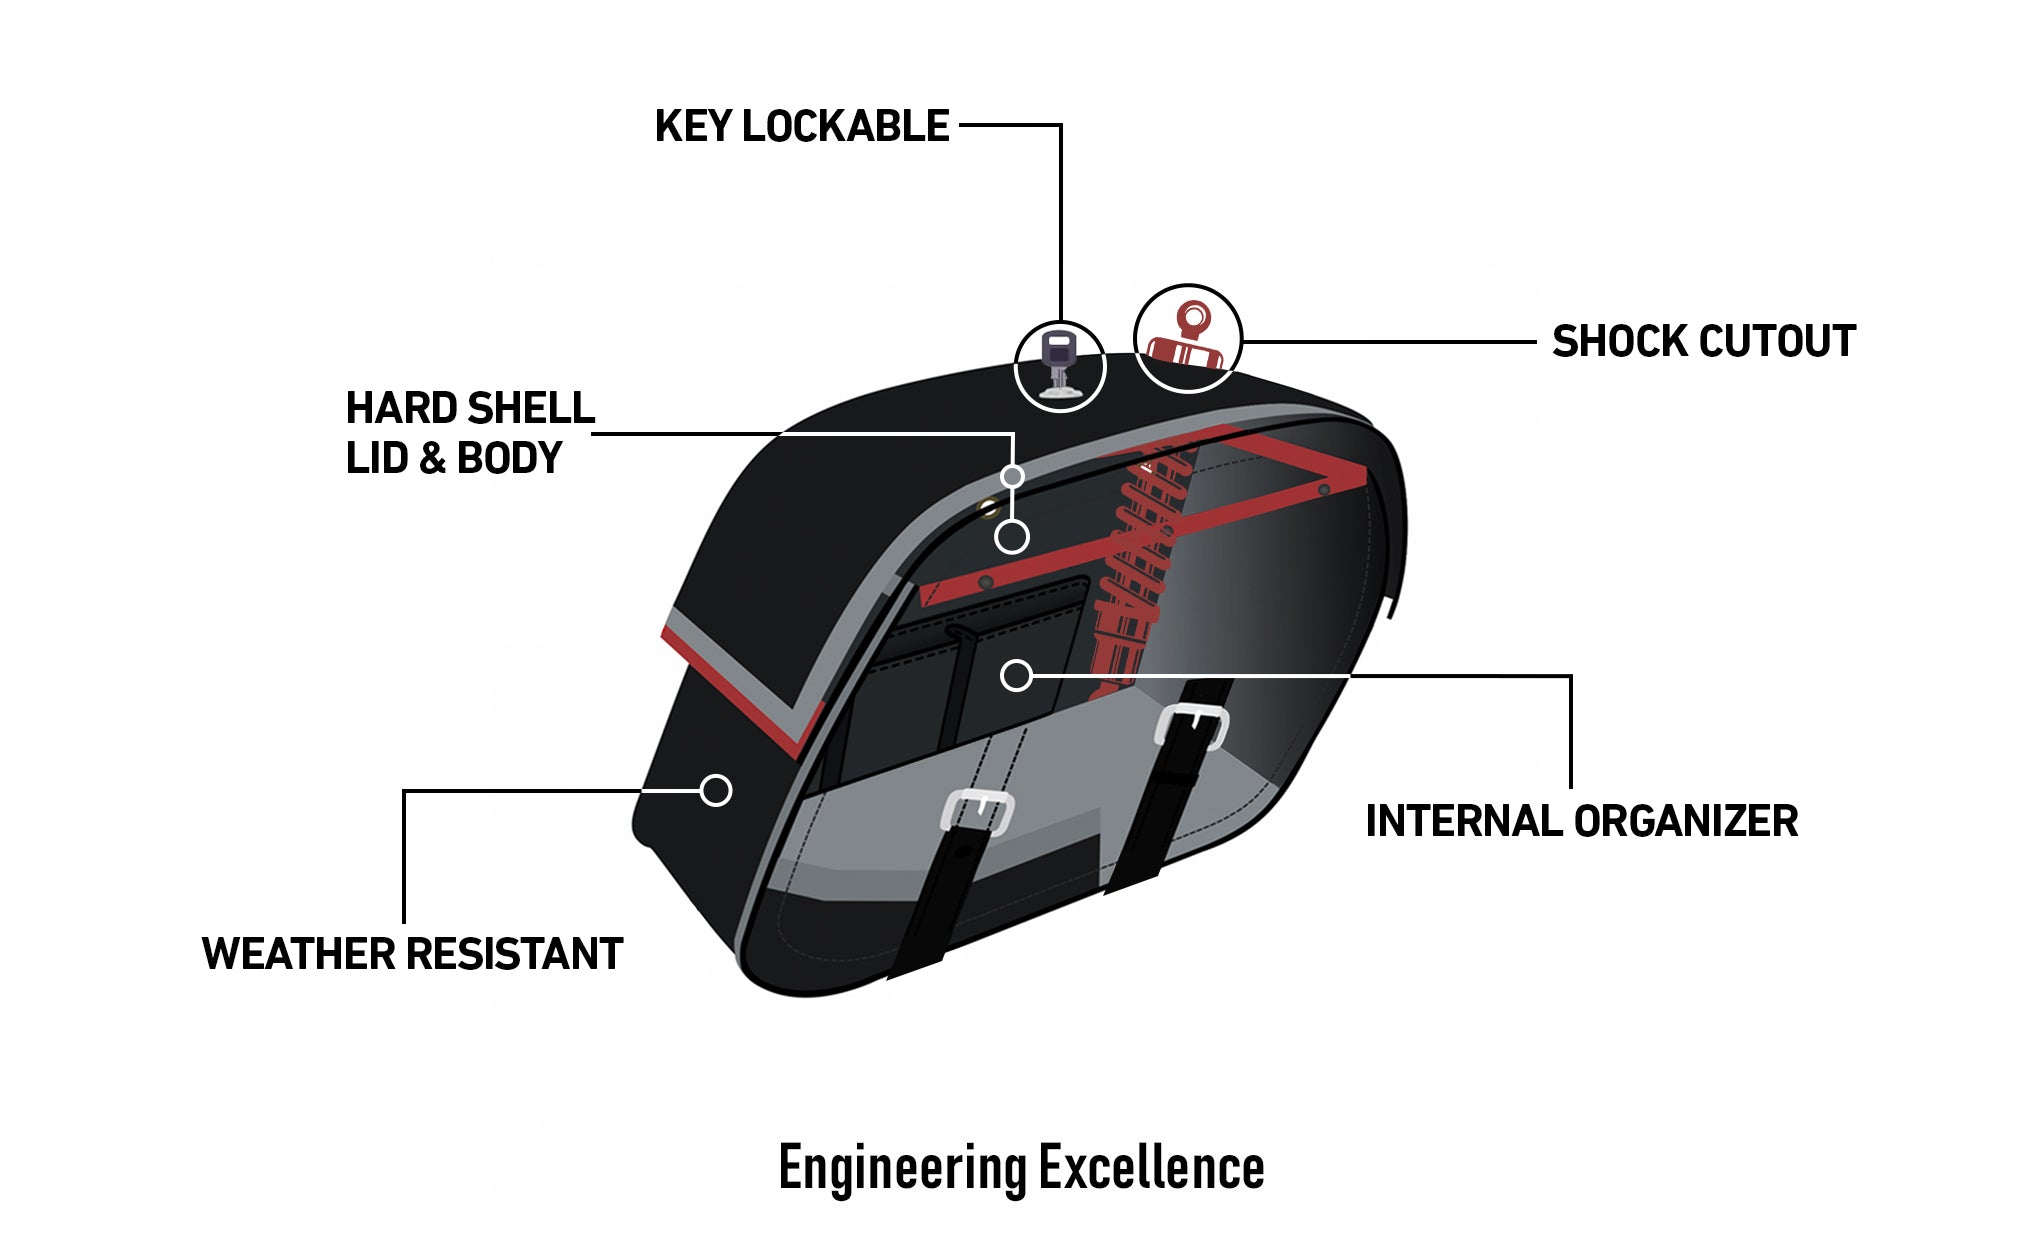 Viking Raven Extra Large Shock Cut Out Leather Motorcycle Saddlebags For Harley Dyna Street Bob Fxdb I Engineering Excellence with Bag on Bike @expand